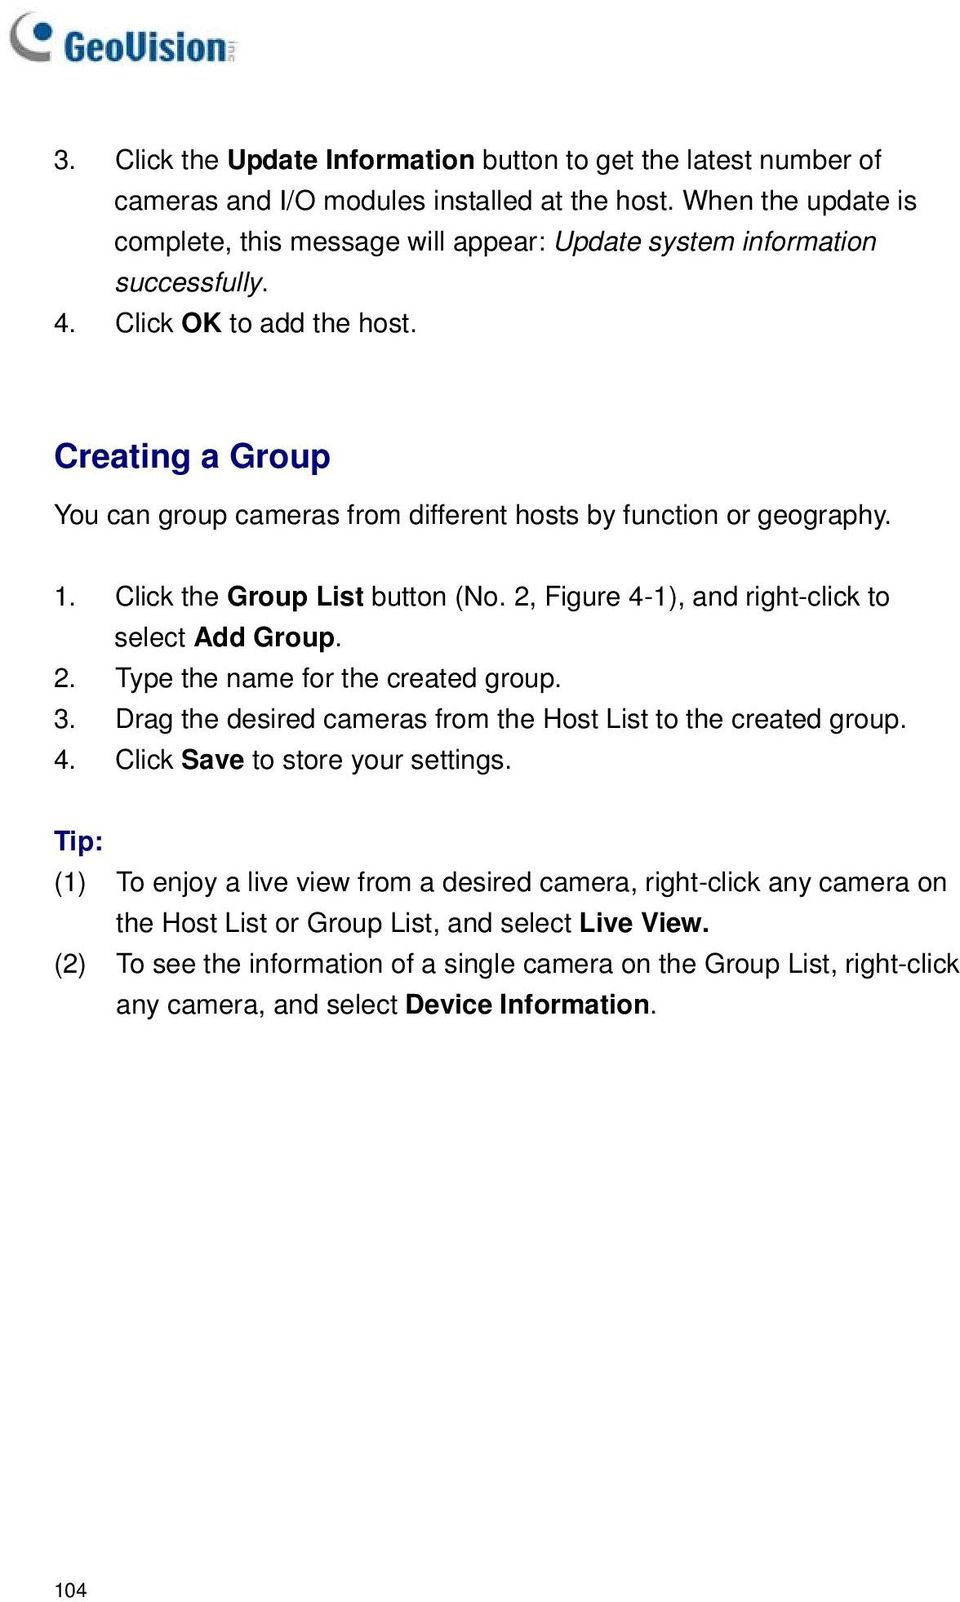 Creating a Group You can group cameras from different hosts by function or geography. 1. Click the Group List button (No. 2, Figure 4-1), and right-click to select Add Group. 2. Type the name for the created group.